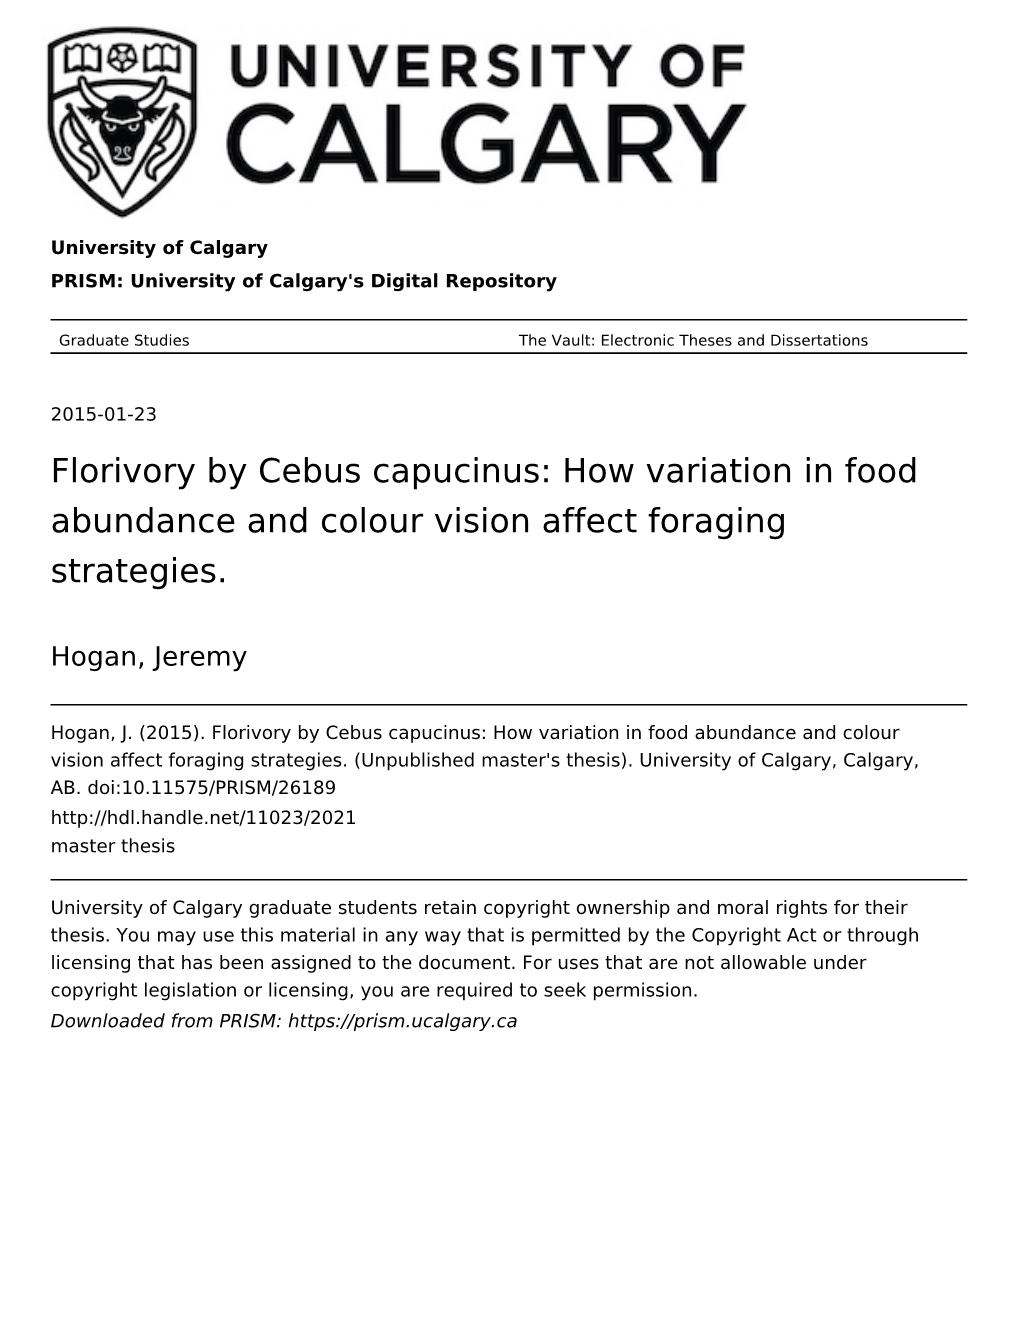 Florivory by Cebus Capucinus: How Variation in Food Abundance and Colour Vision Affect Foraging Strategies